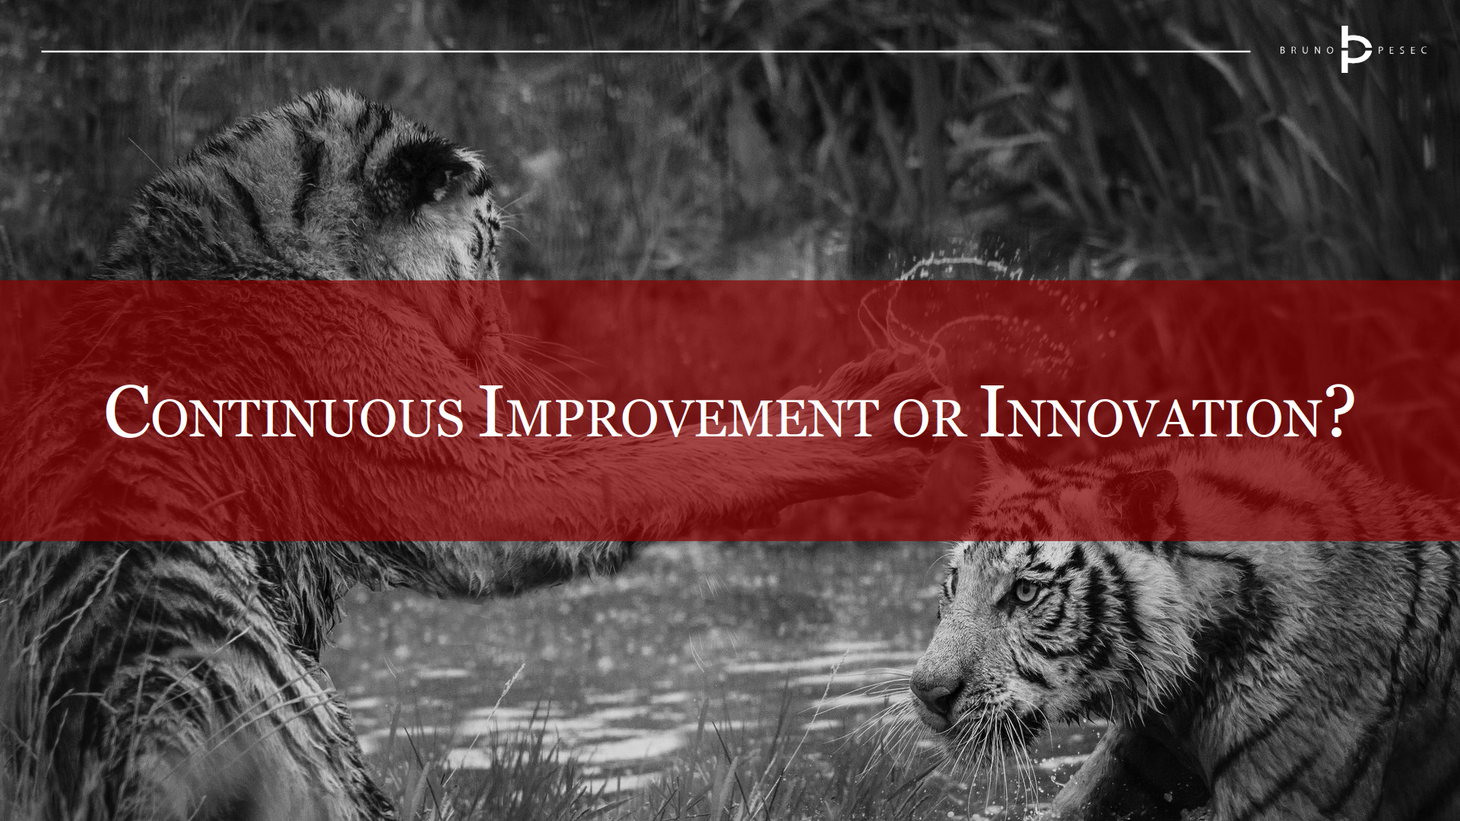 Continuous improvement or innovation?